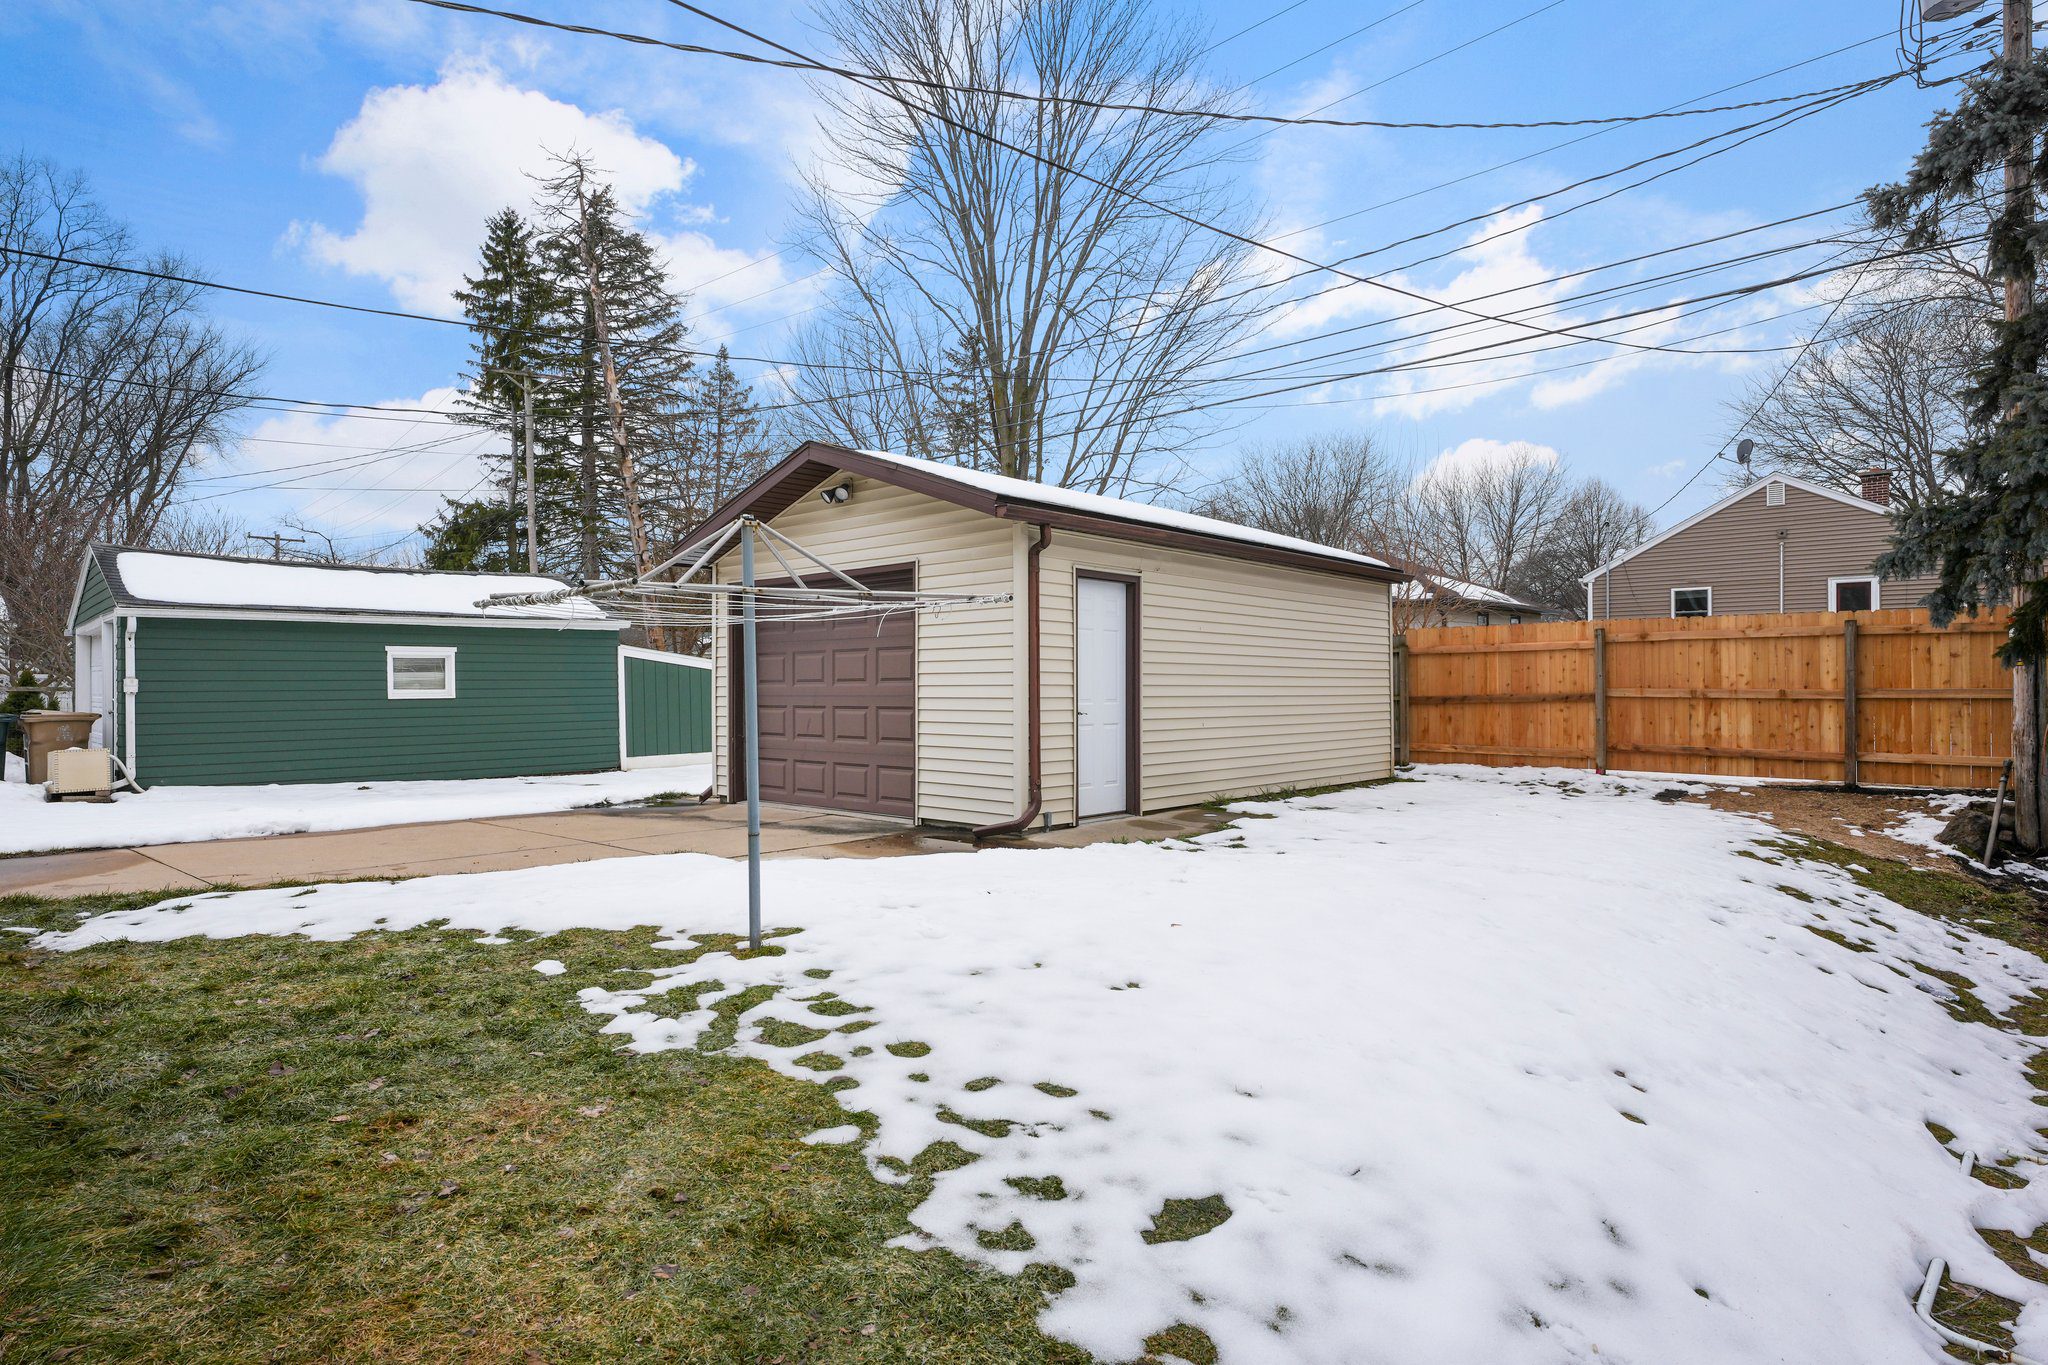 6-web-or-mls-536-pawling-st